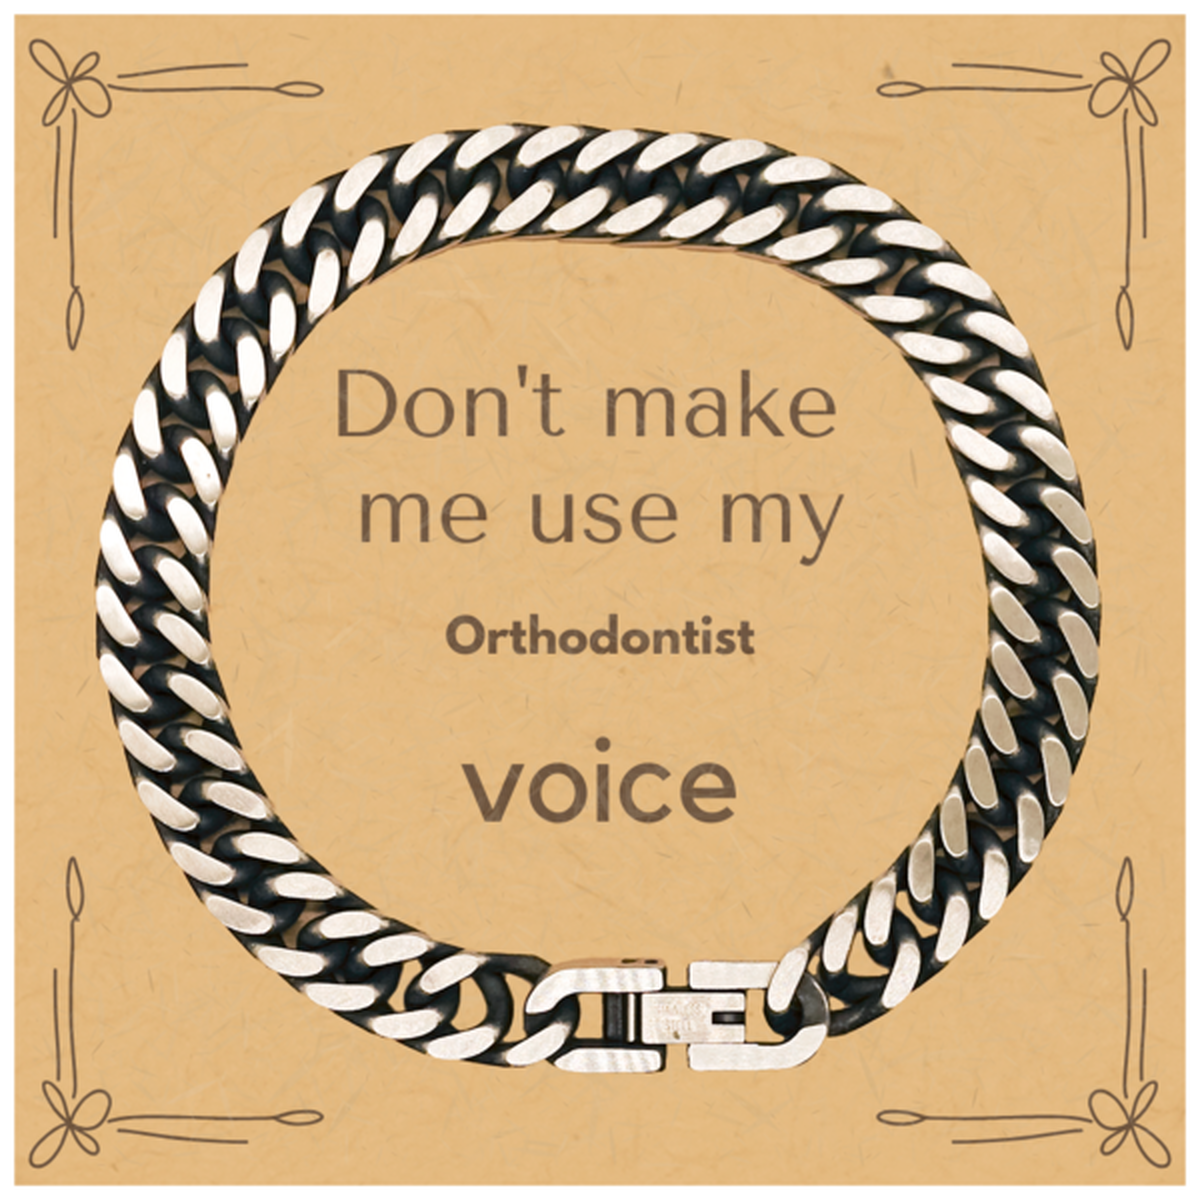 Don't make me use my Orthodontist voice, Sarcasm Orthodontist Card Gifts, Christmas Orthodontist Cuban Link Chain Bracelet Birthday Unique Gifts For Orthodontist Coworkers, Men, Women, Colleague, Friends